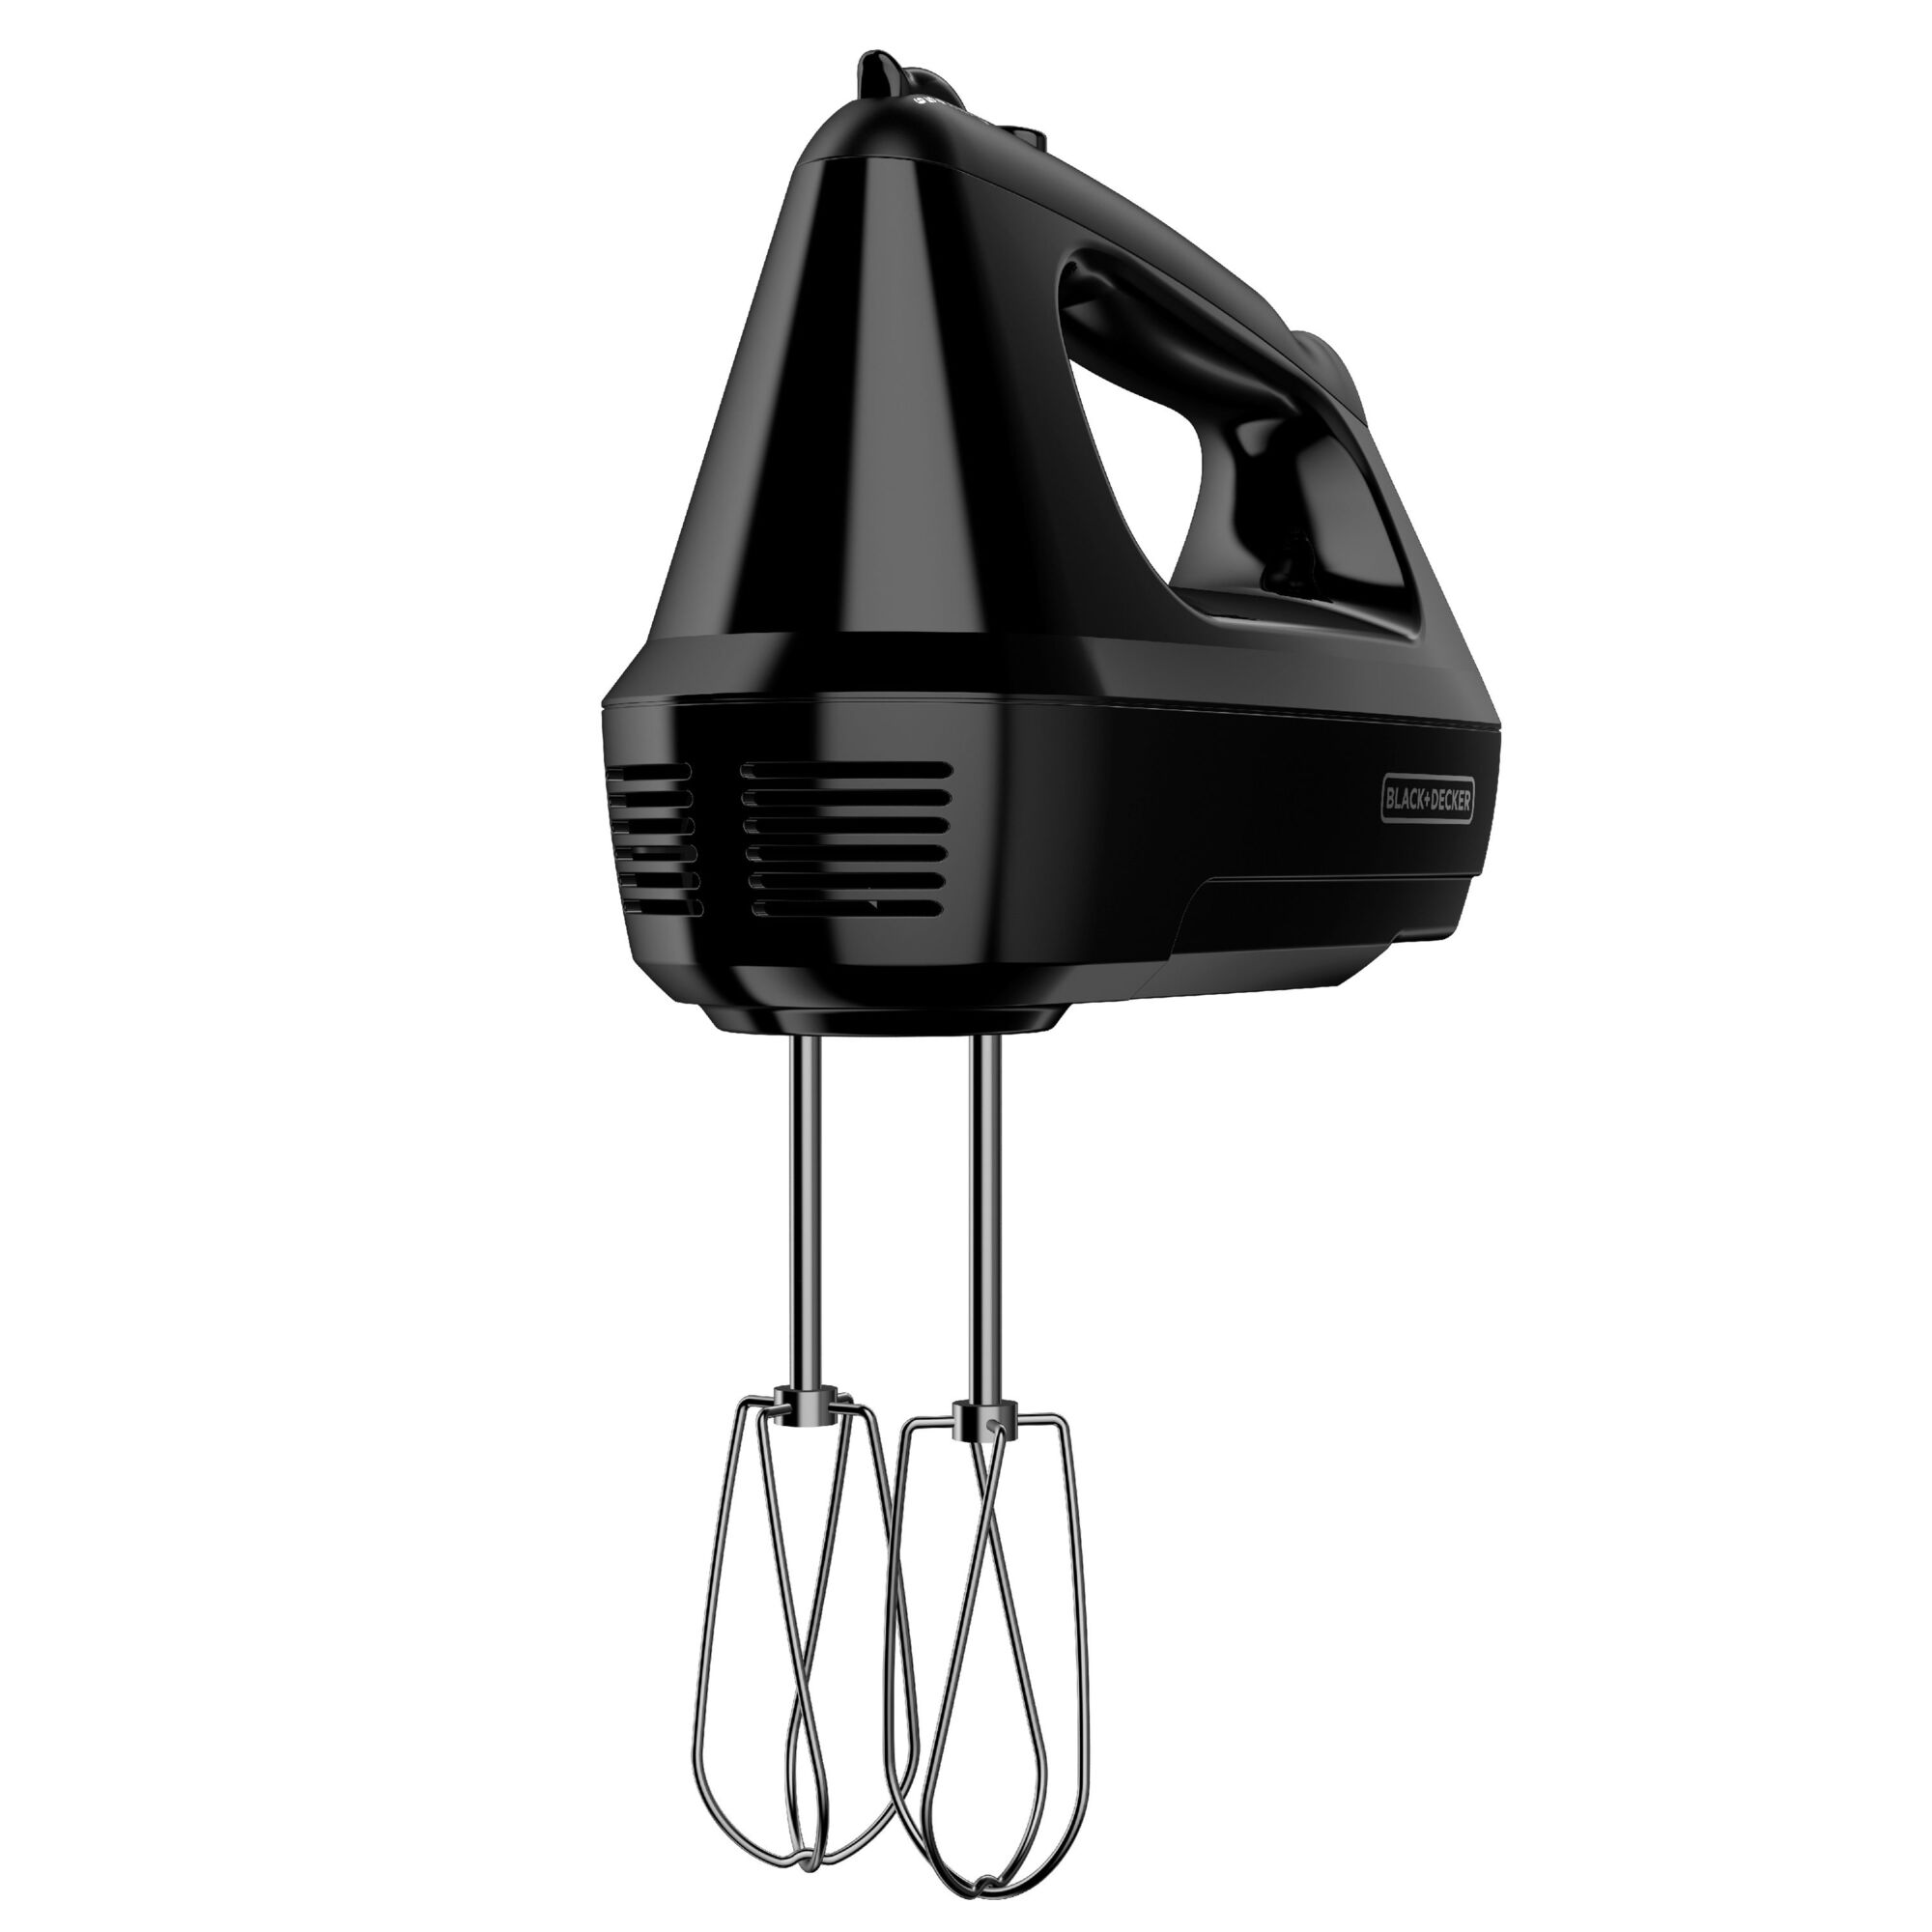 Hand mixer with wire beaters on white background.